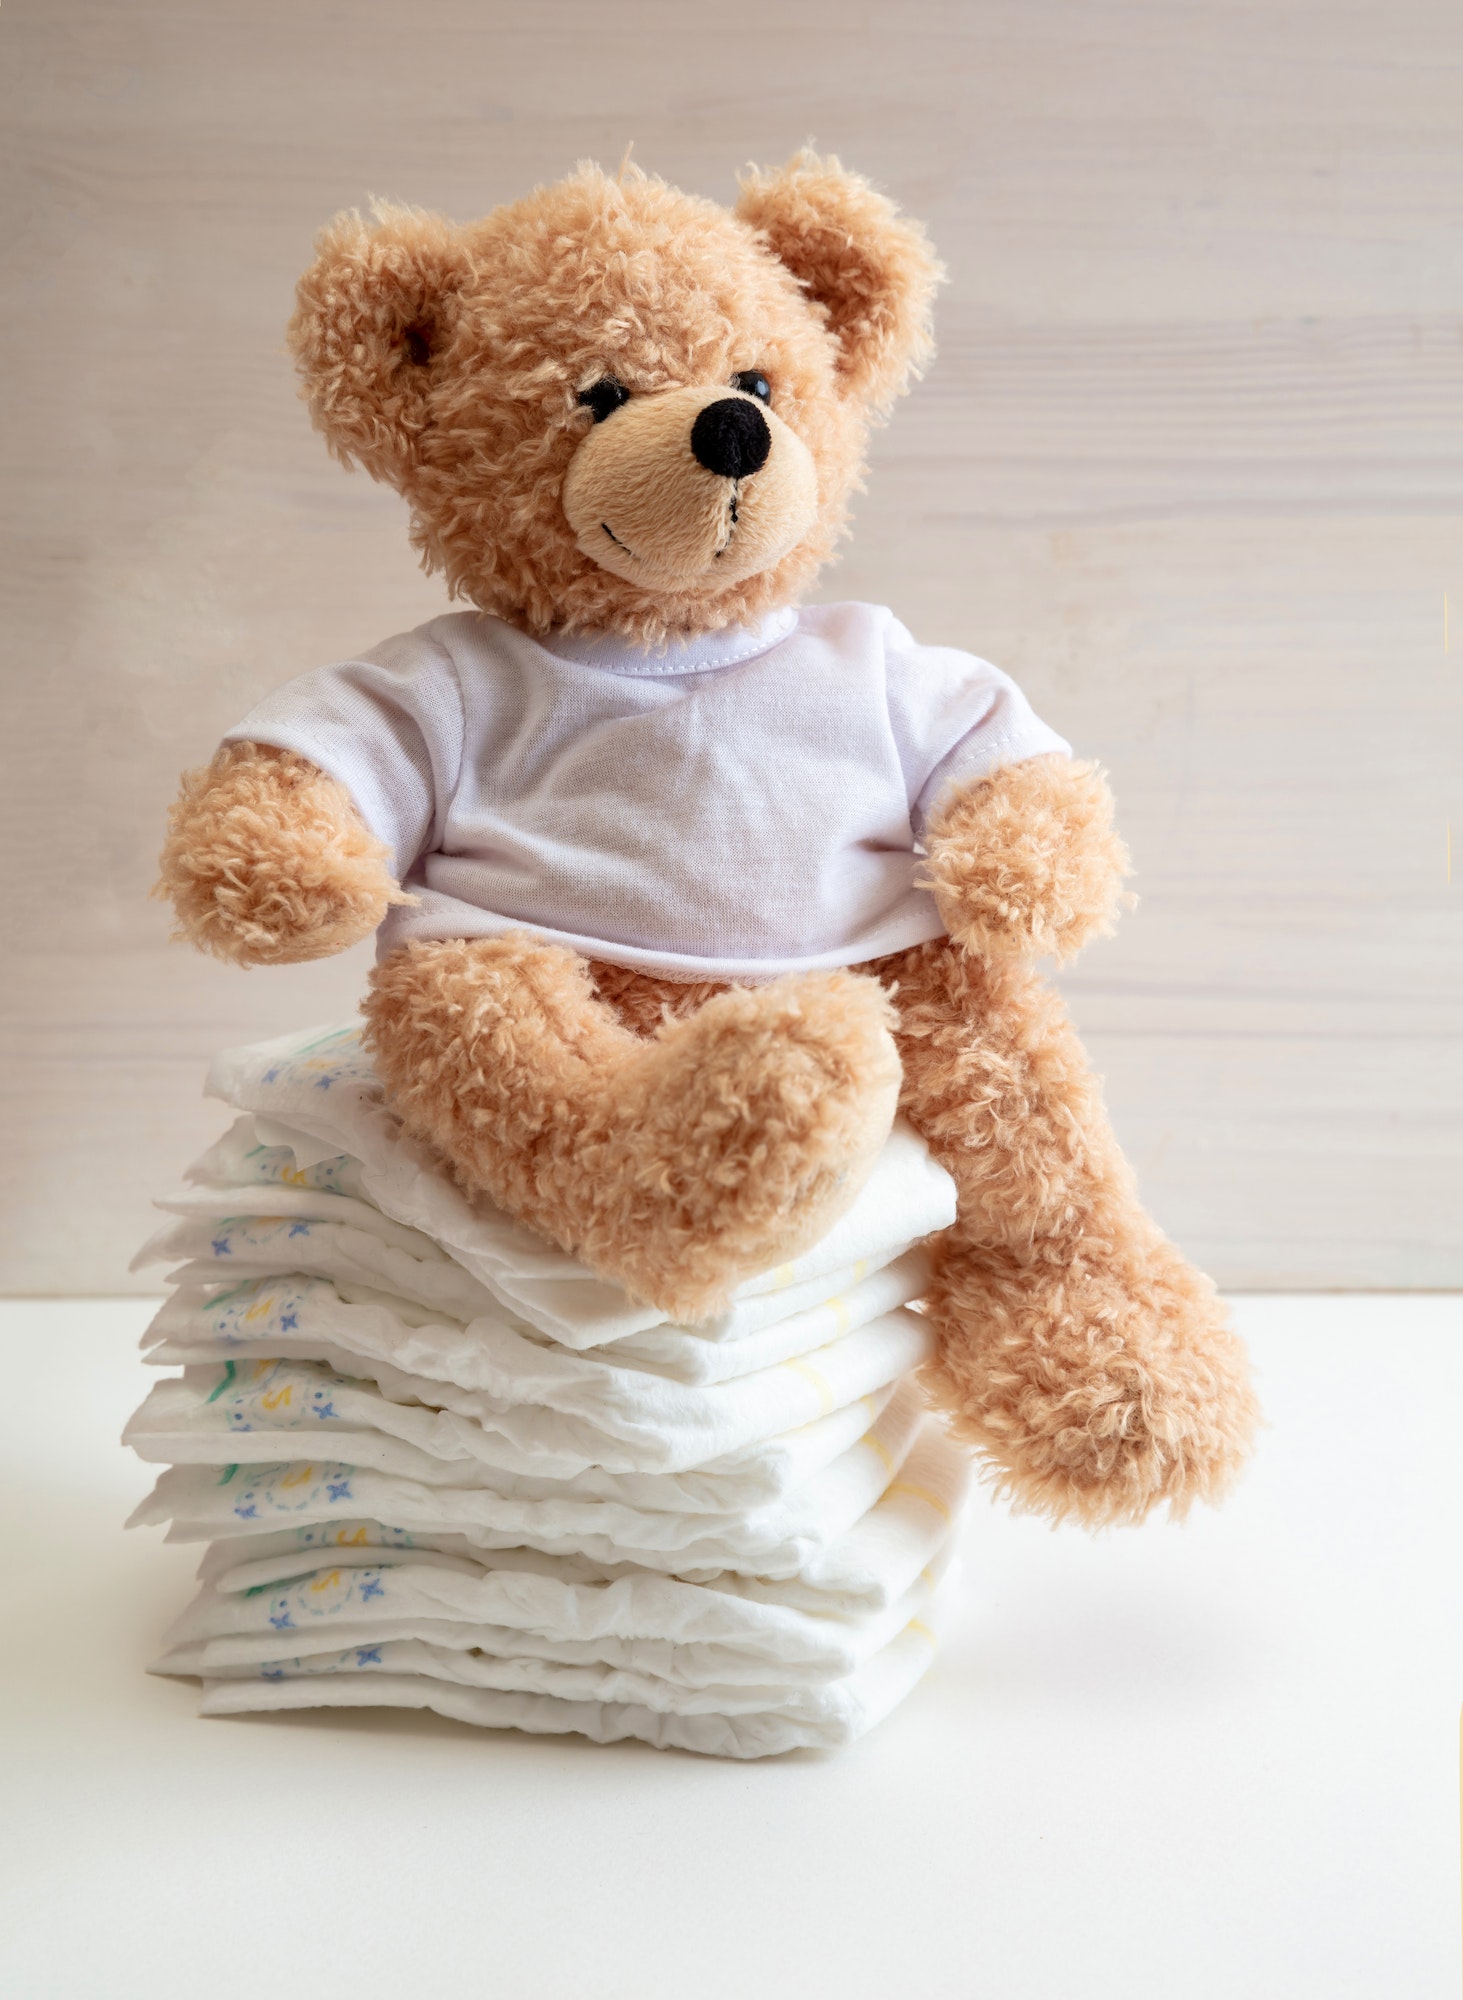 Baby diapers stack and teddy on white color floor